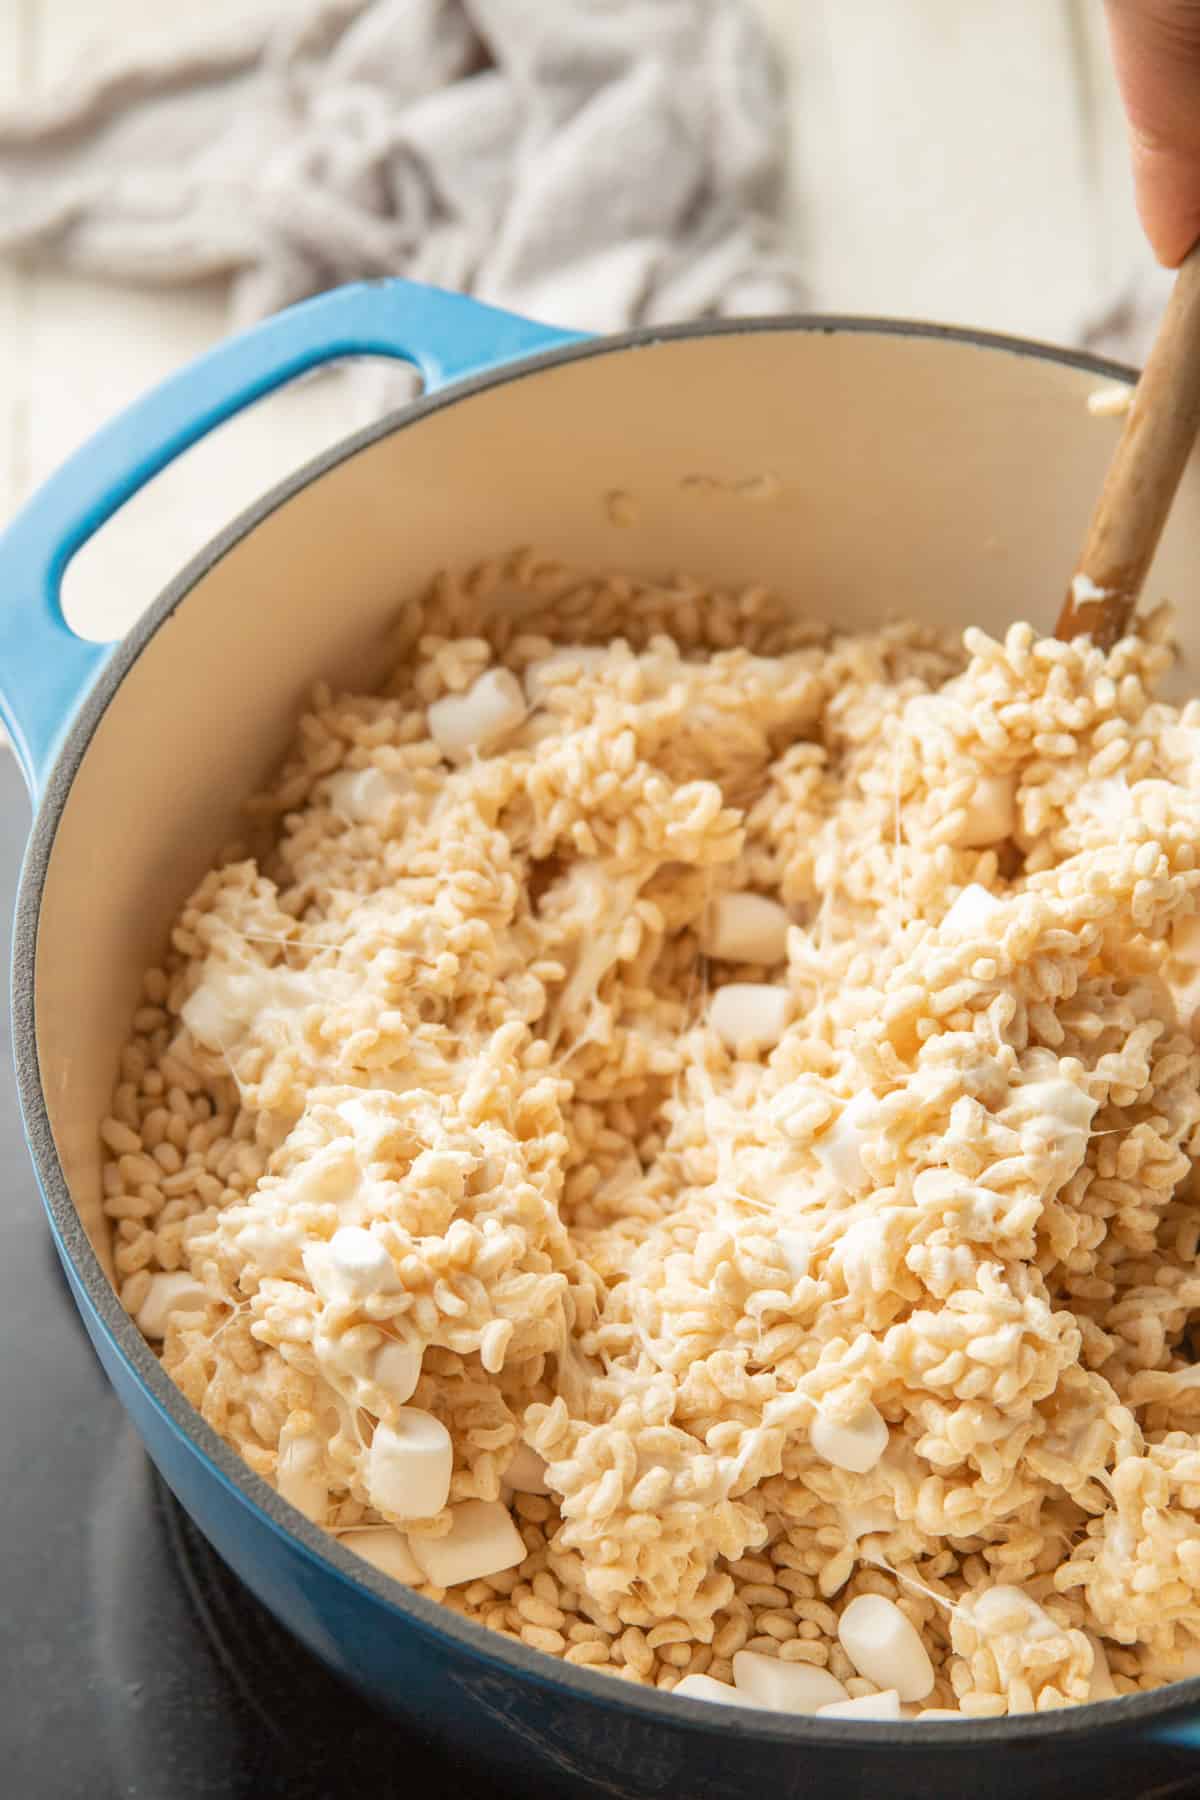 Spoon stirring crisp rice cereal into melted marshmallow mixture in a pot.